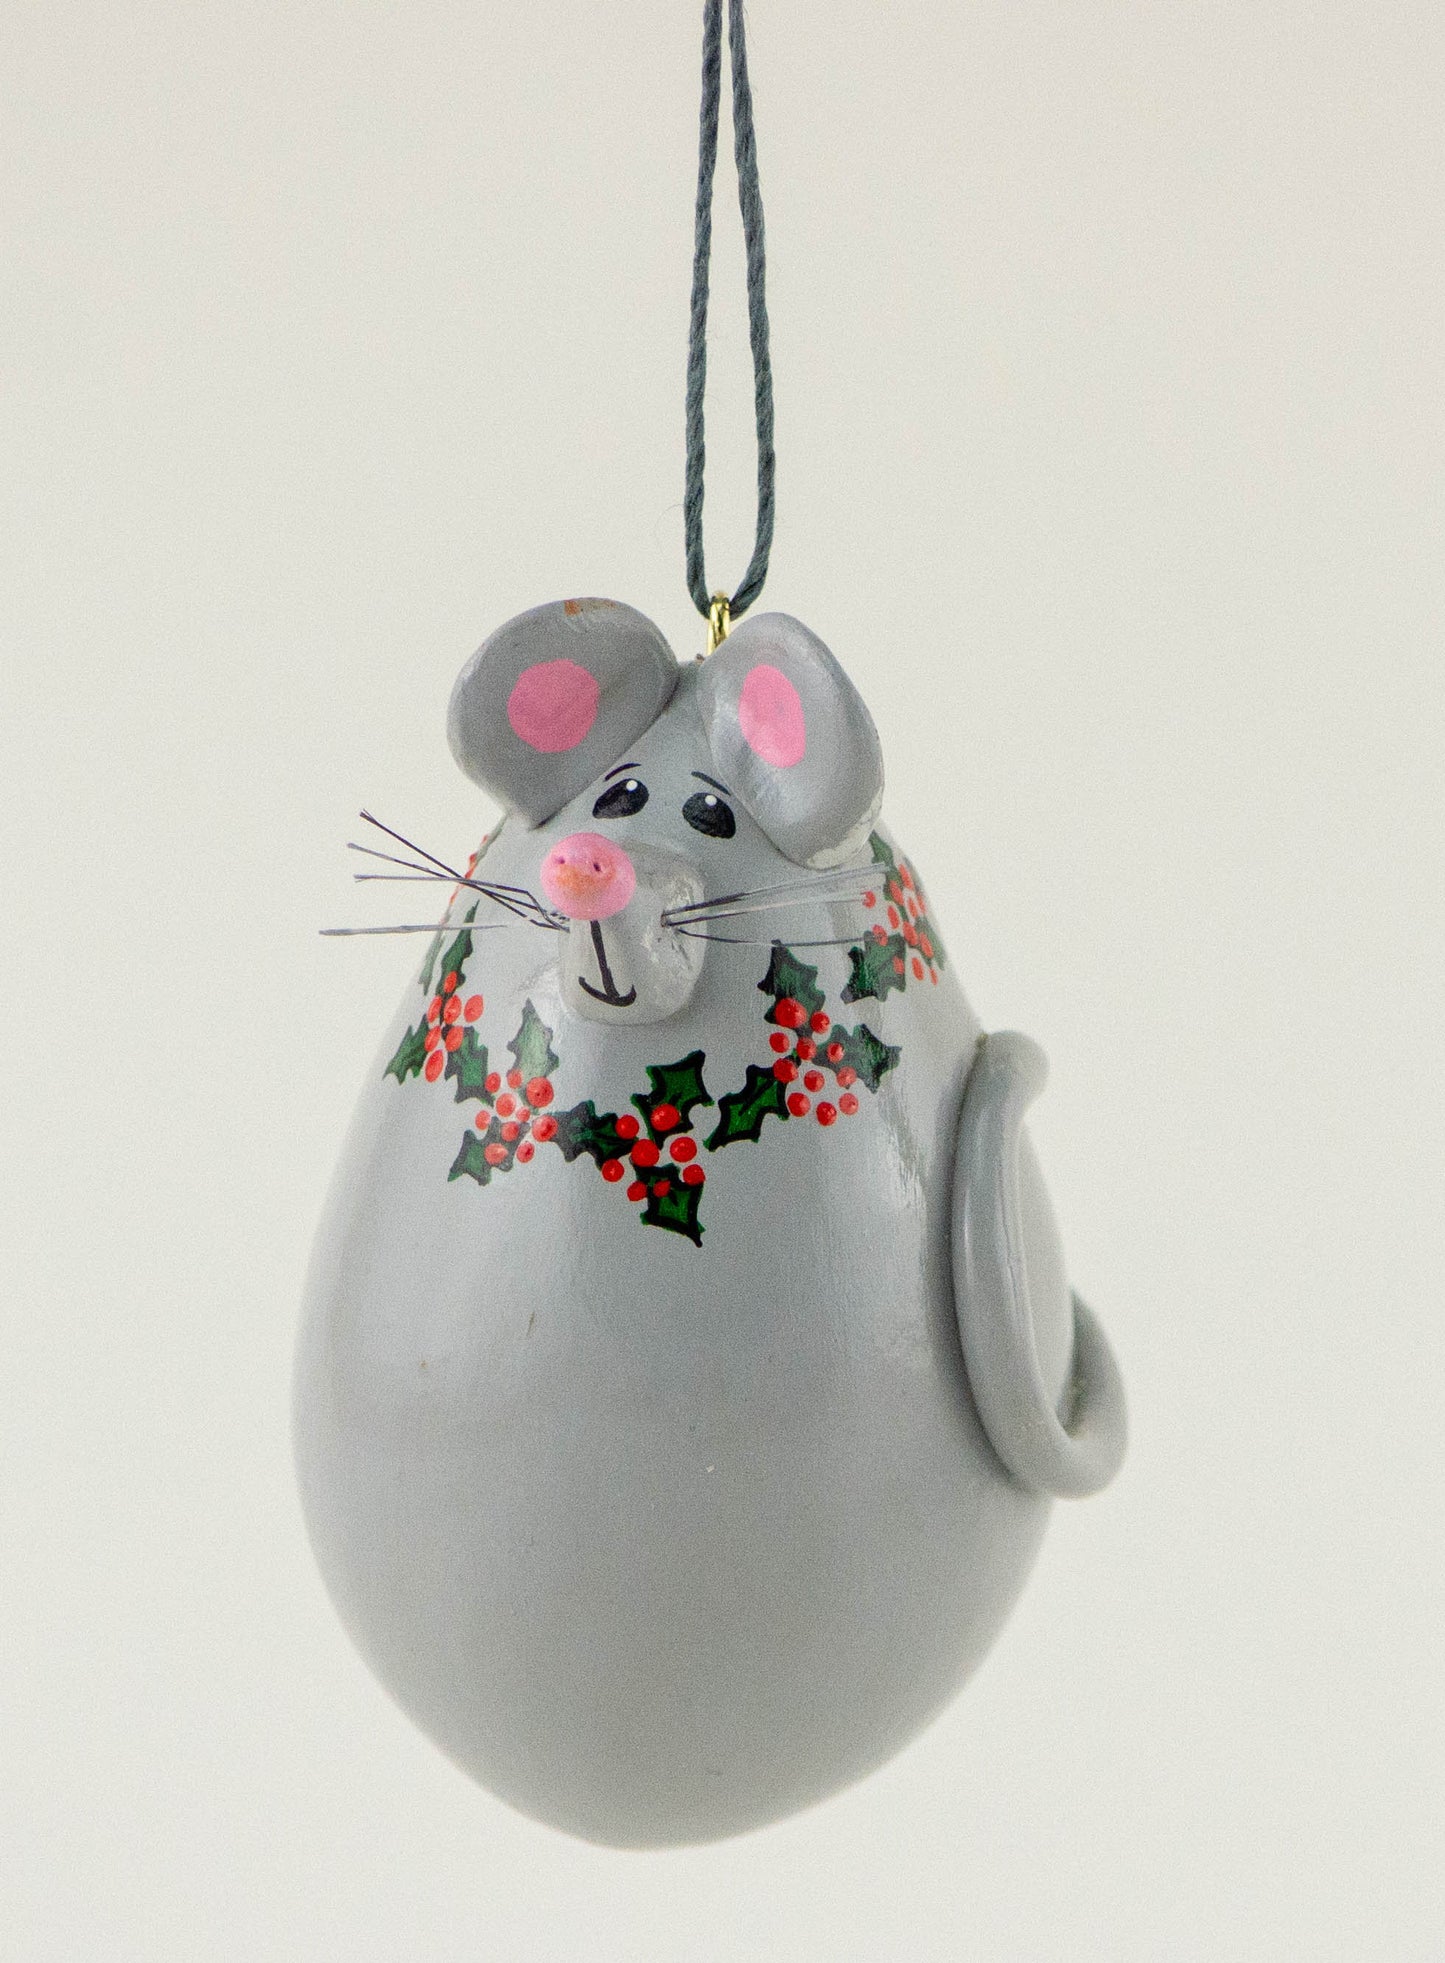 Mouse Ornament Gourd Ornament -  Gray Mouse - Holly Design - Handmade